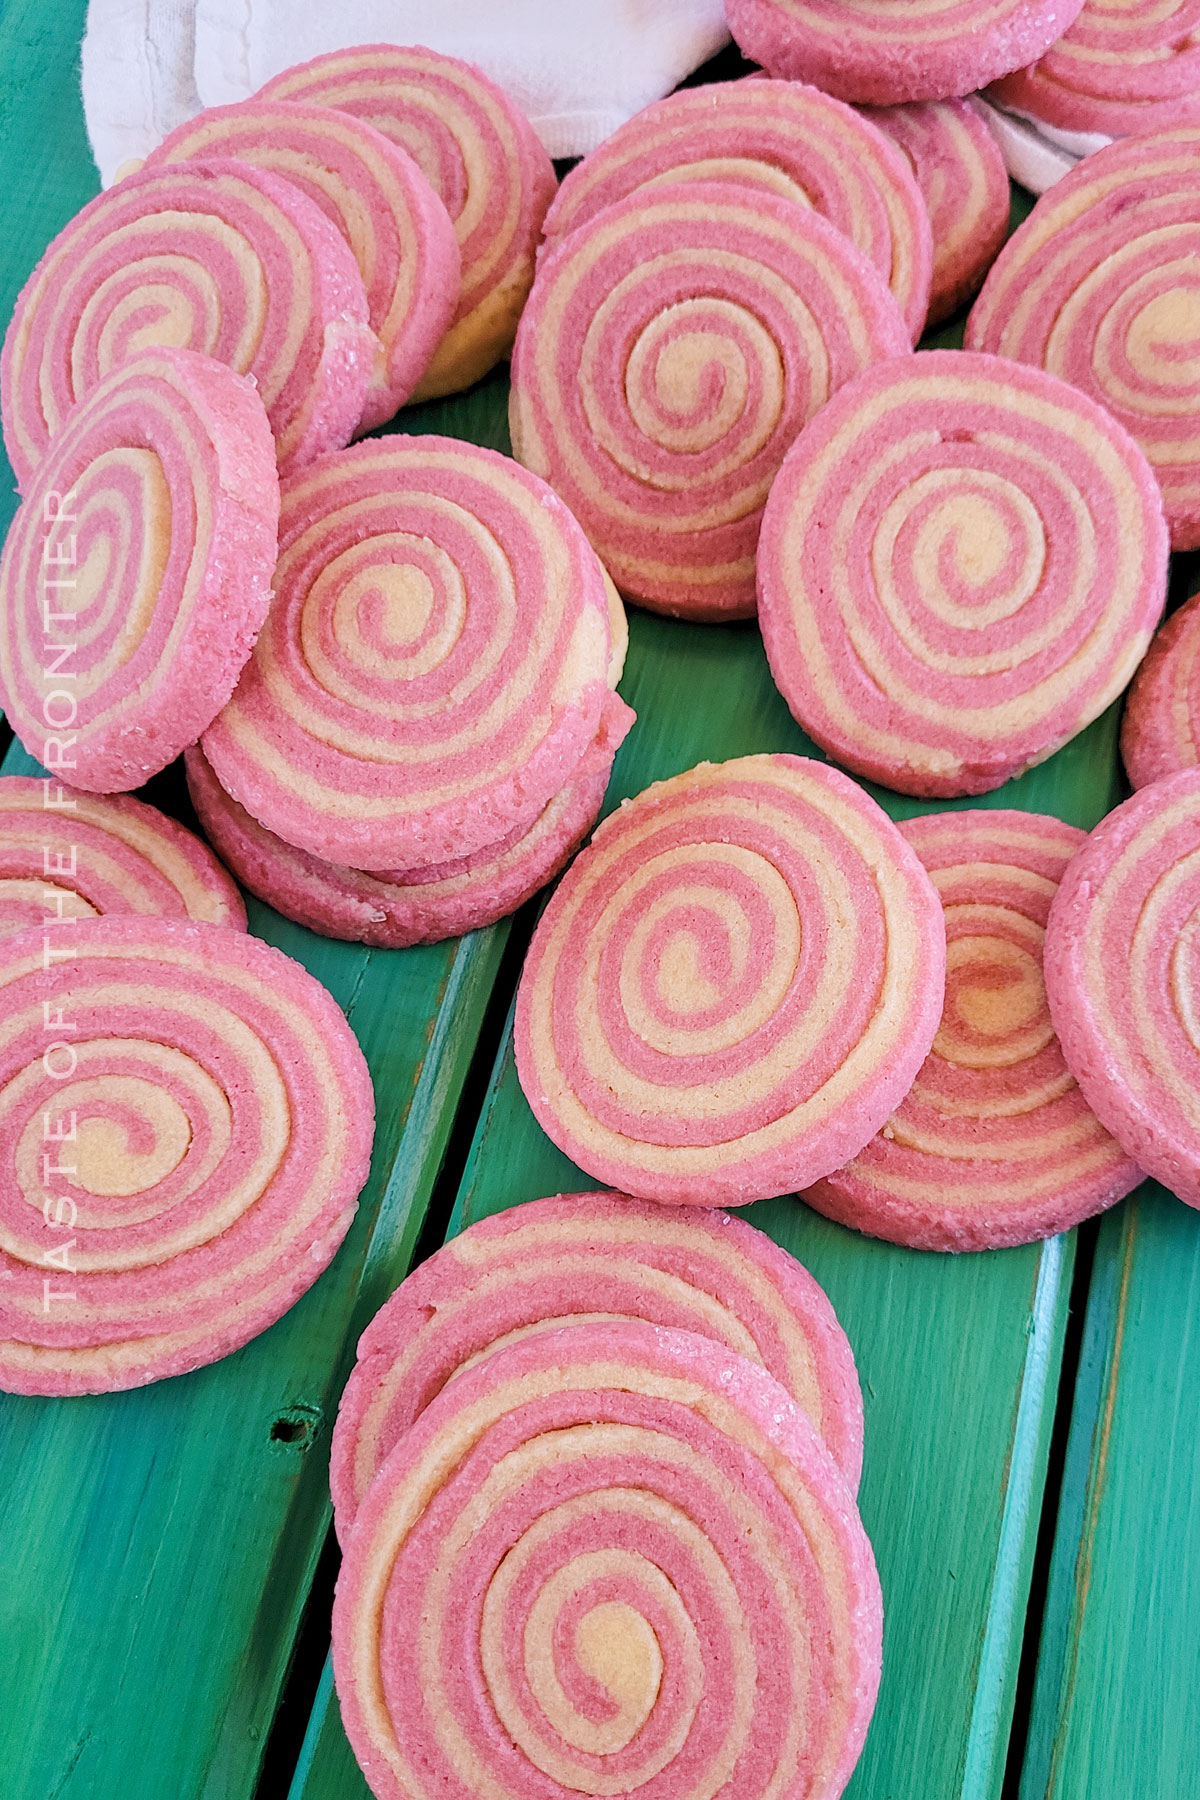 pink and white cookies